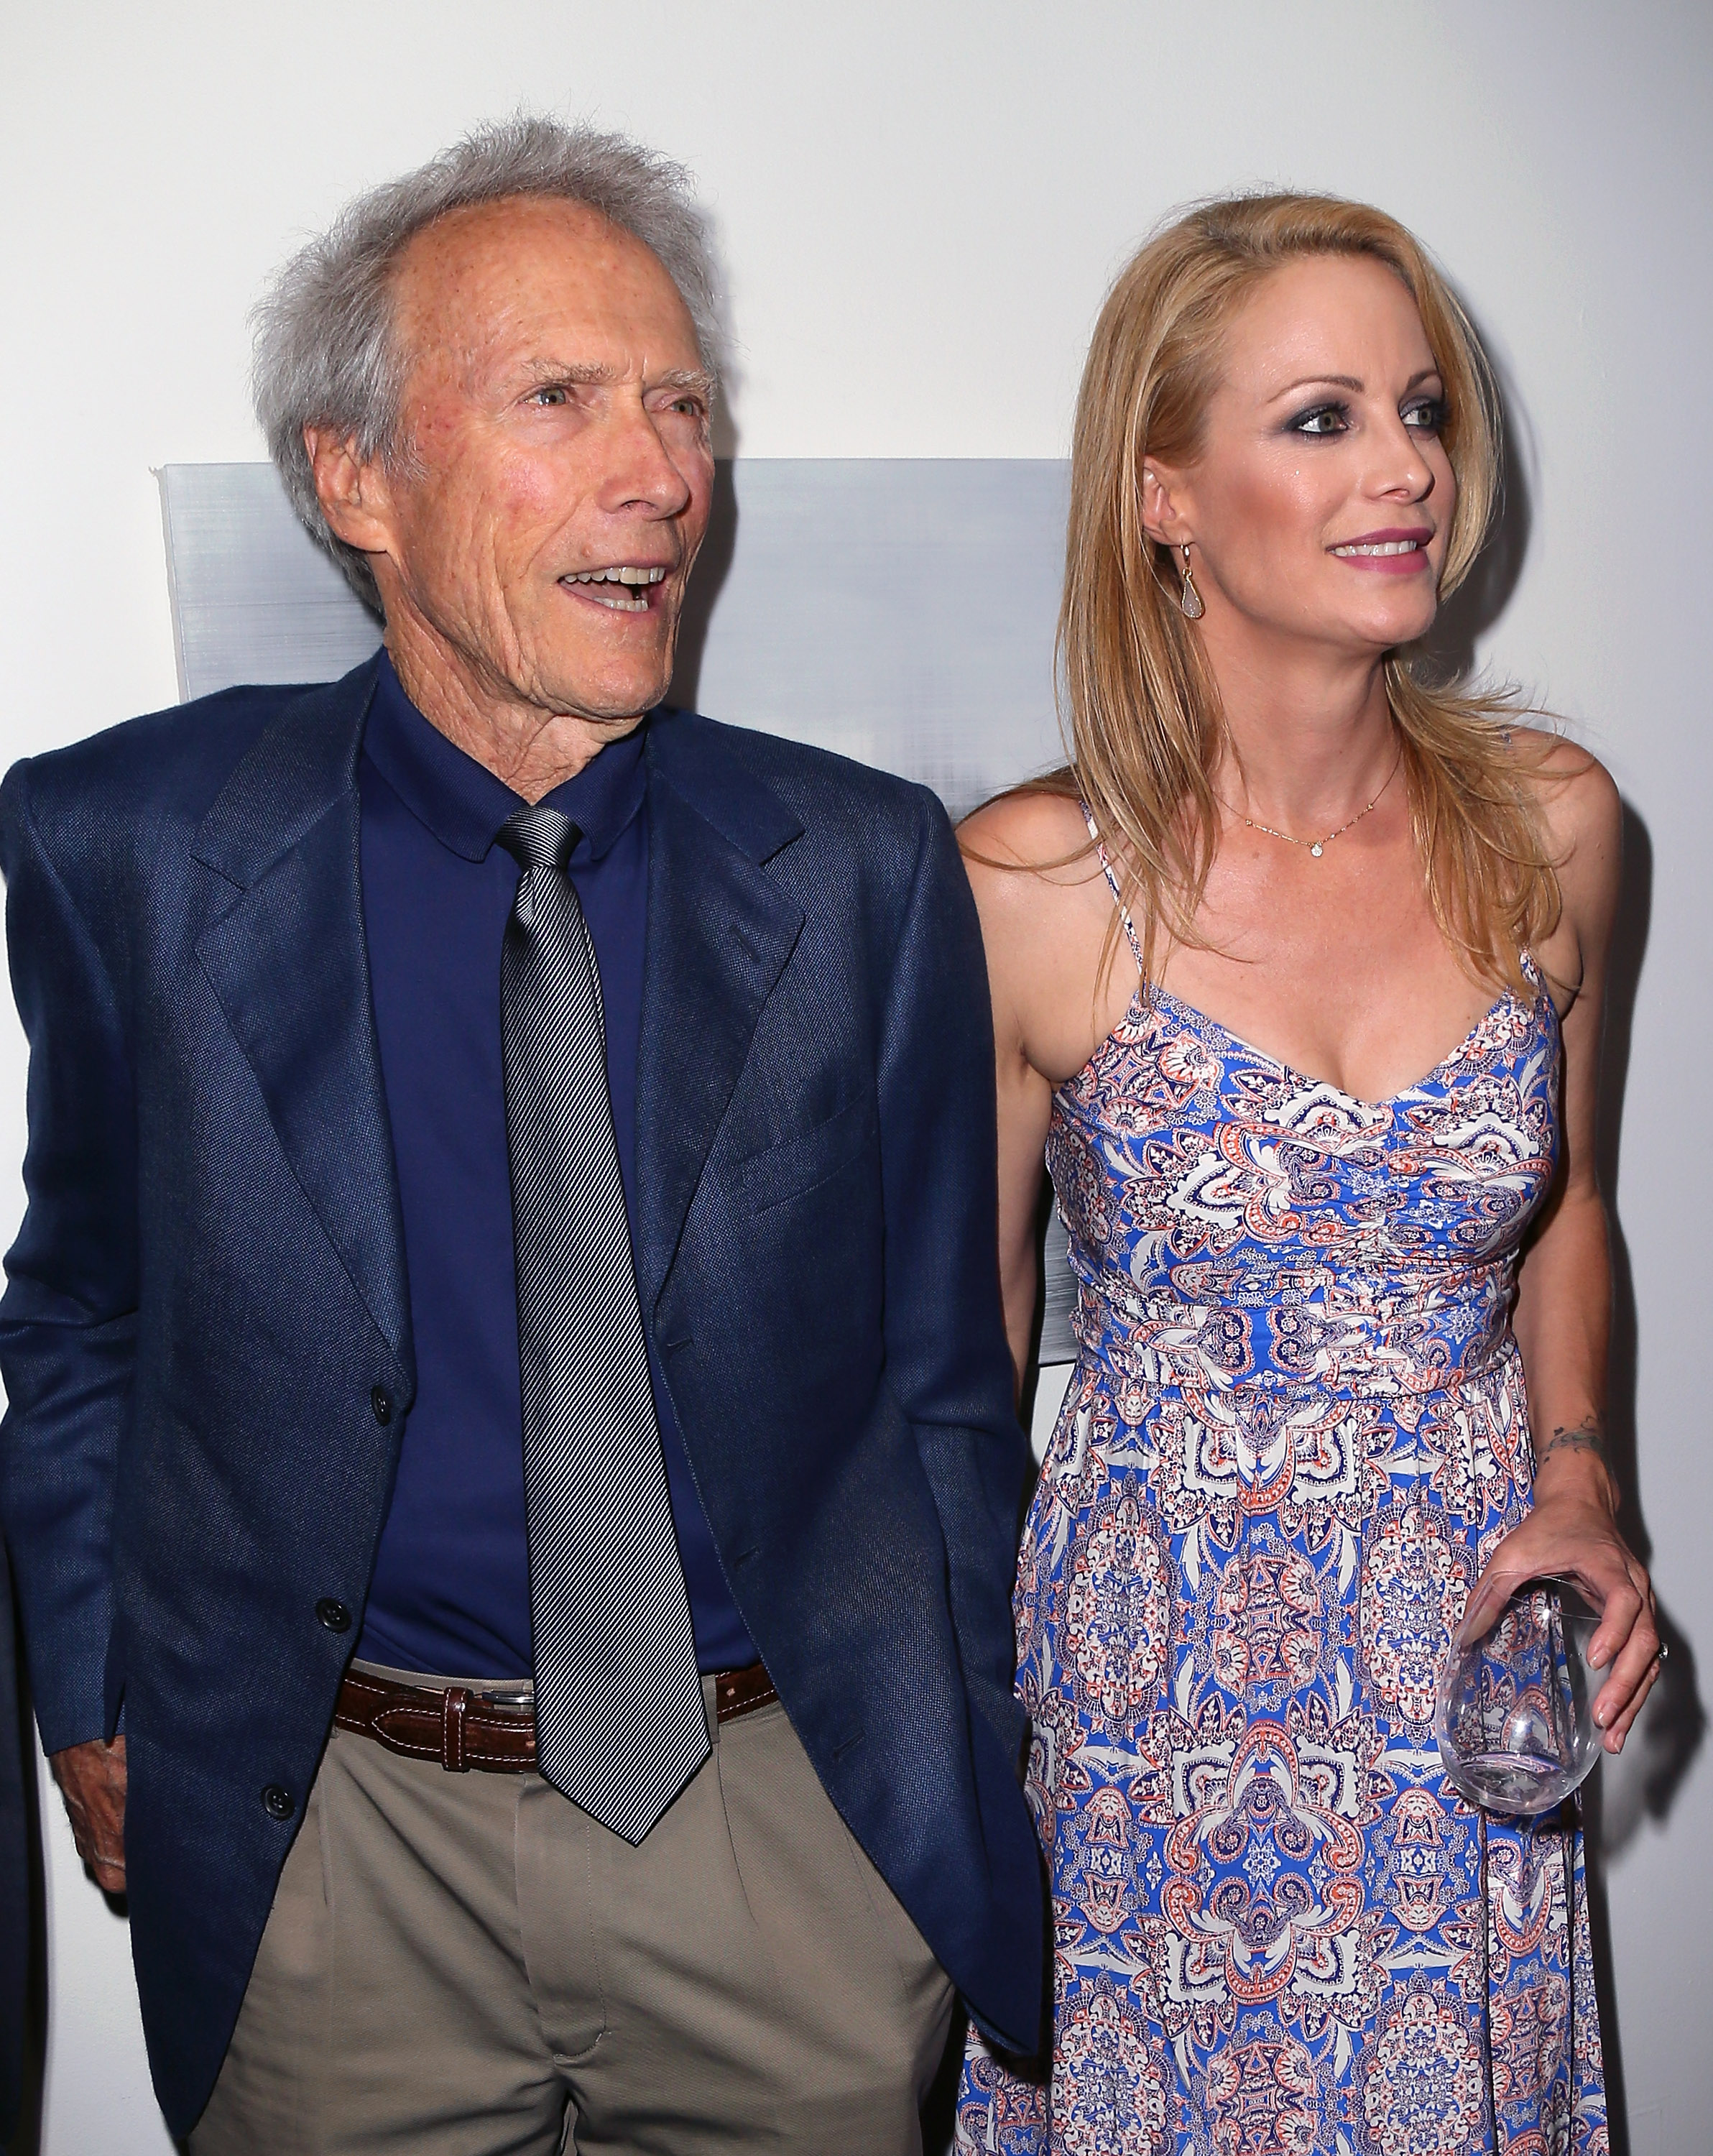 Clint and Alison Eastwood at the Art for Animals fundraiser art event in 2015. | Source: Getty Images